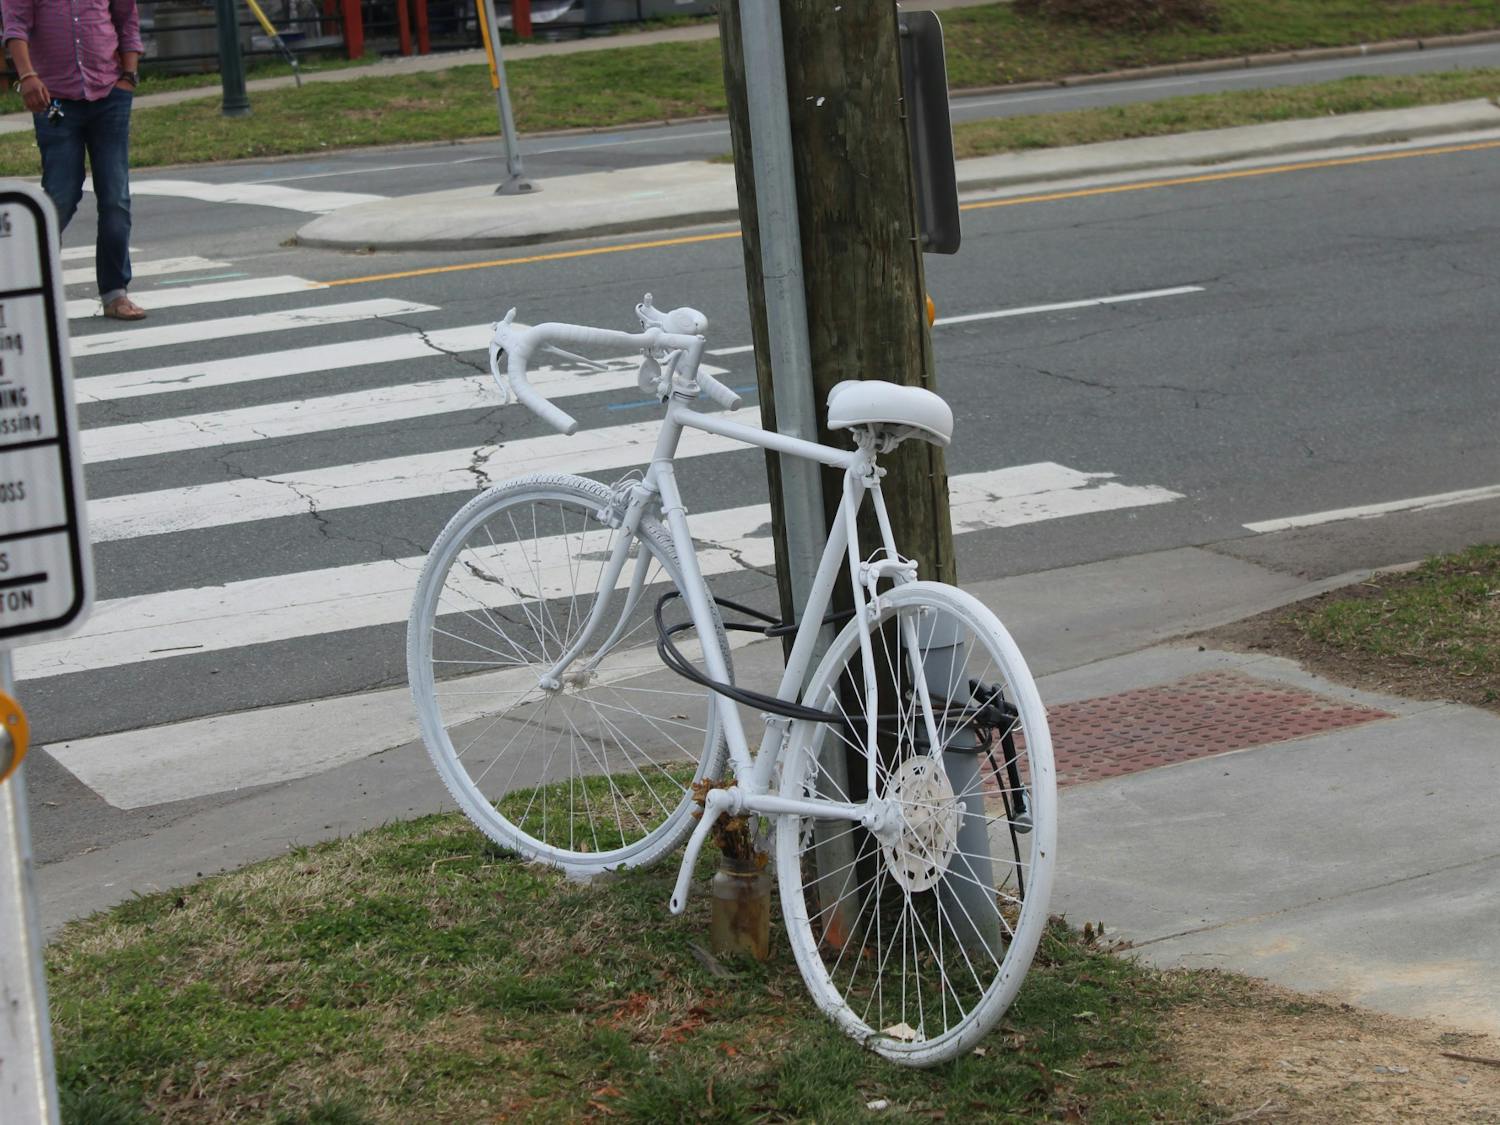 To promote National Bike Month, the Towns of Chapel Hill and Carrboro have been hosting a variety of cycling events.